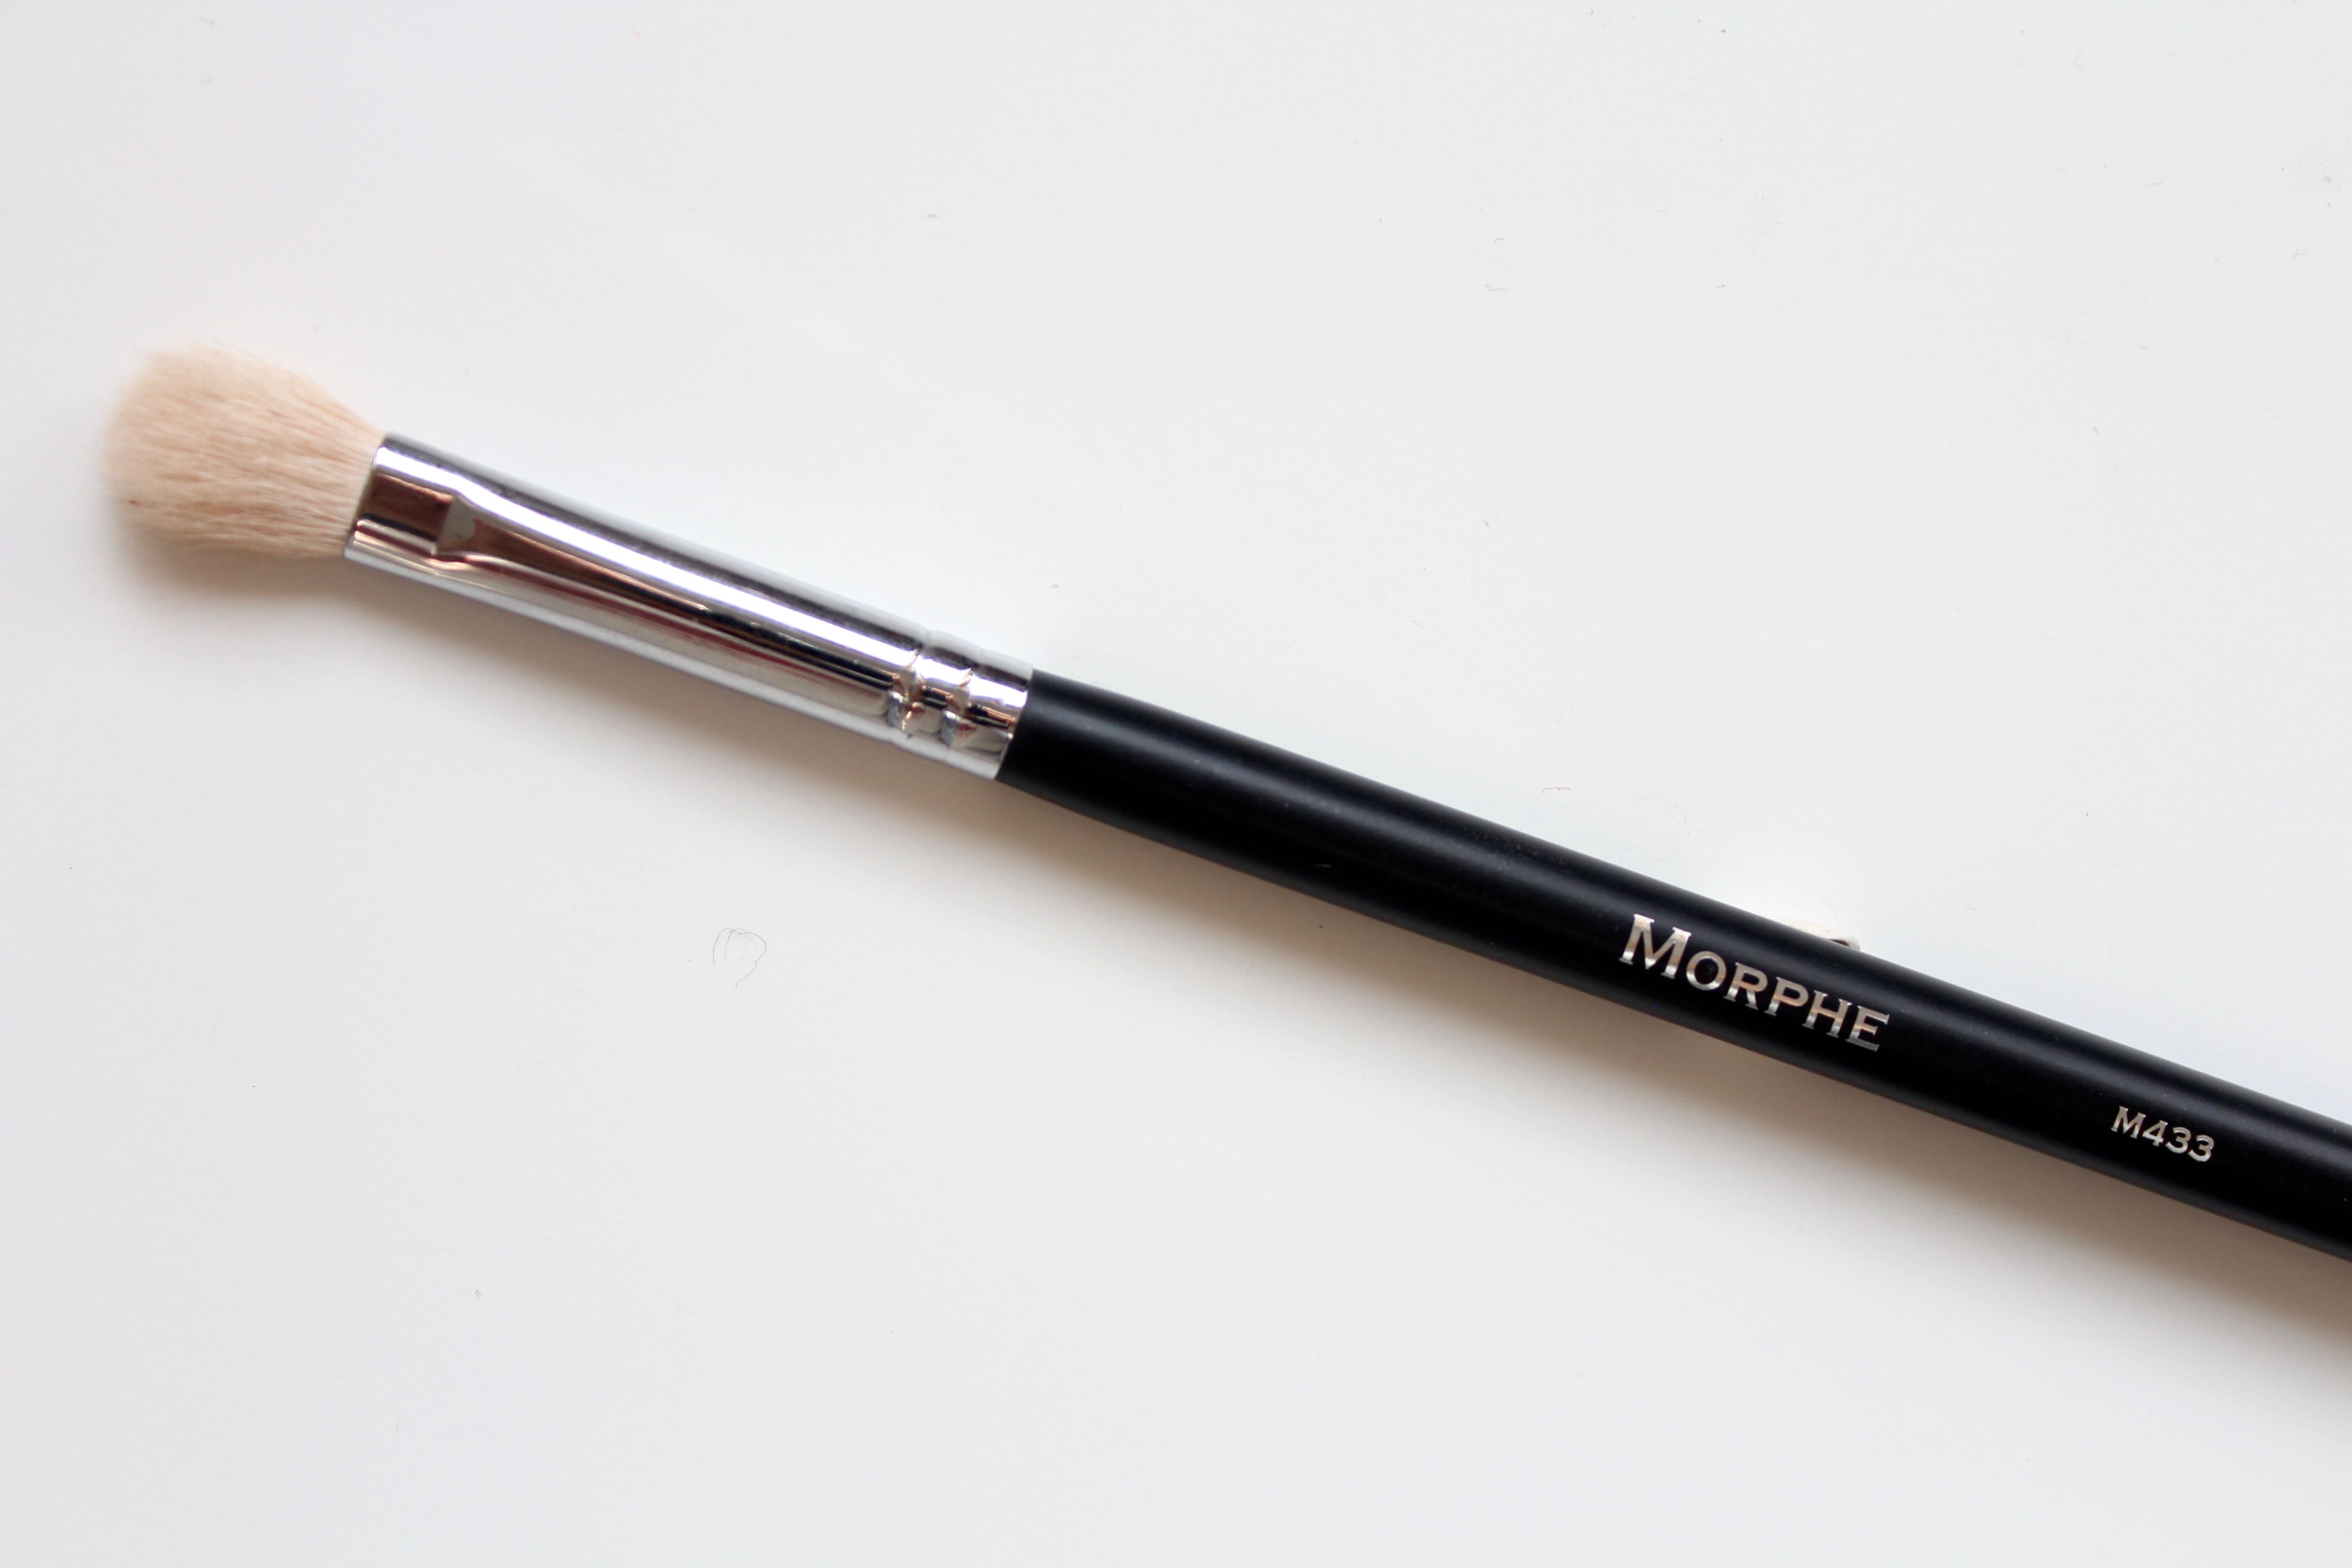 Morphe M433 Pro Firm Blending Brush review by Facemadeup.com